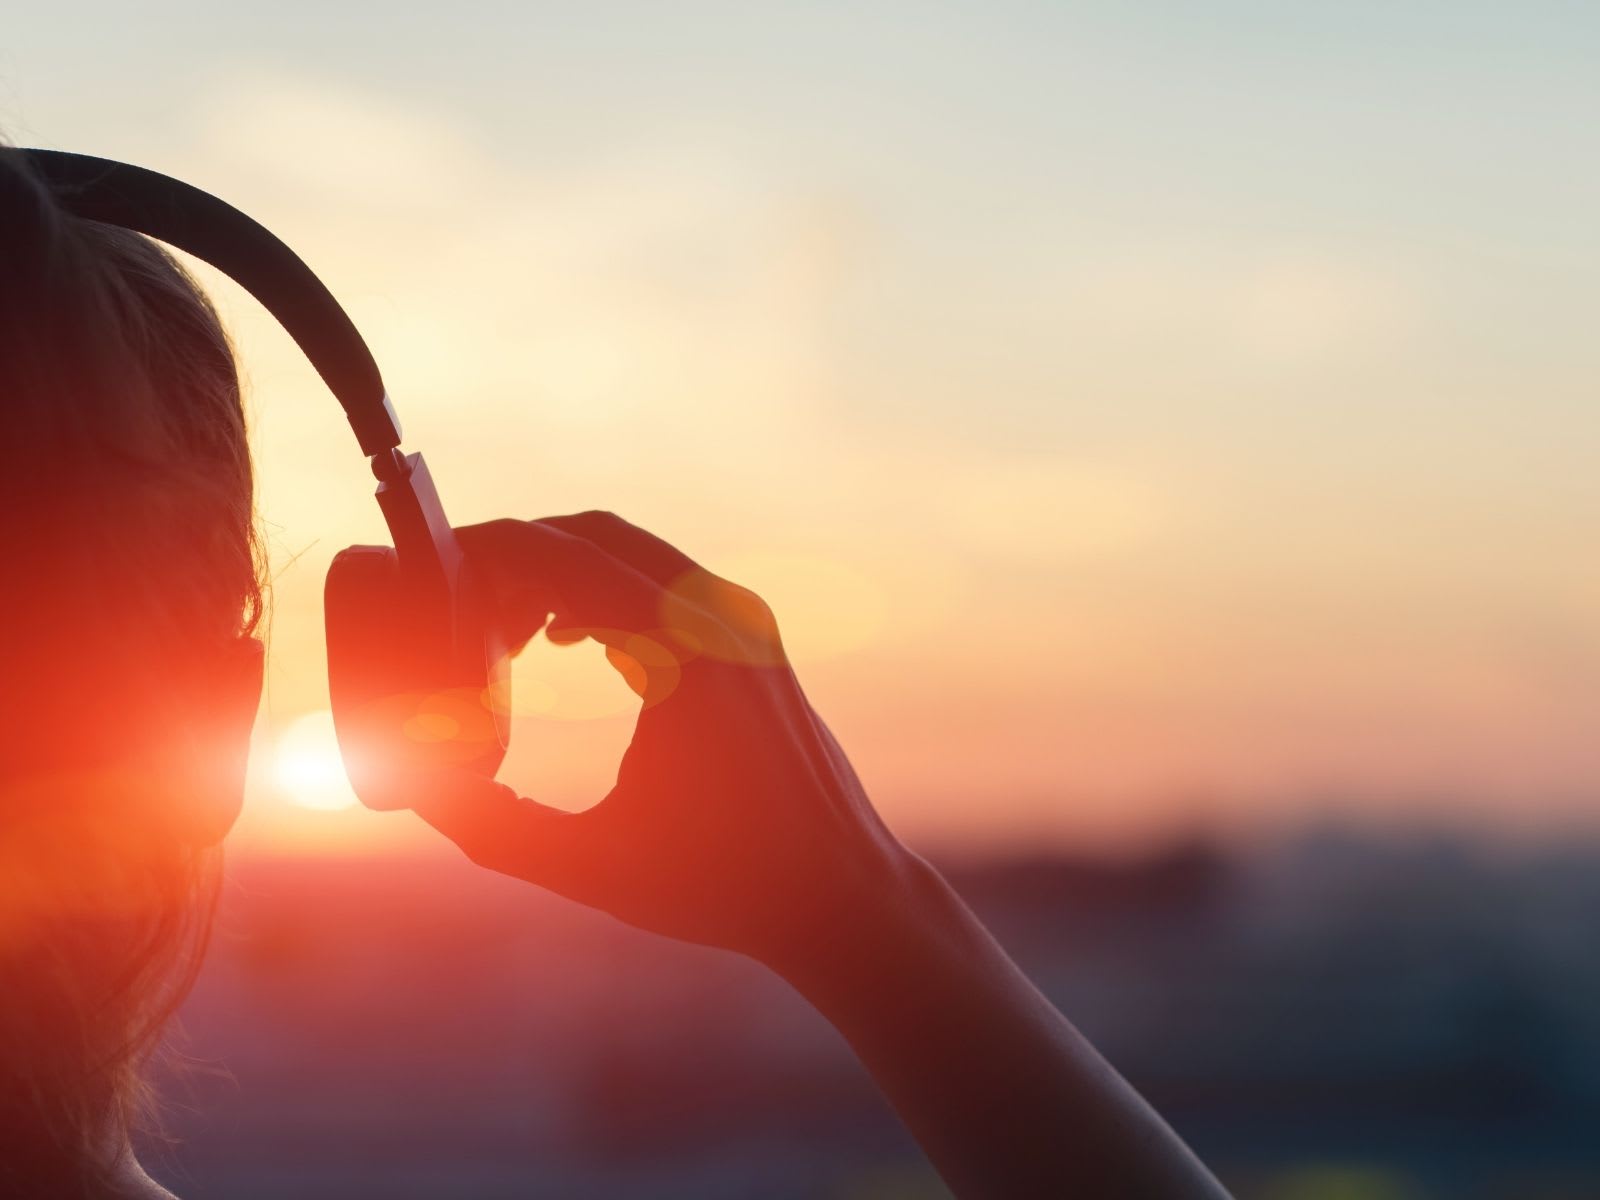 Female wearing headphones looking at the sunset